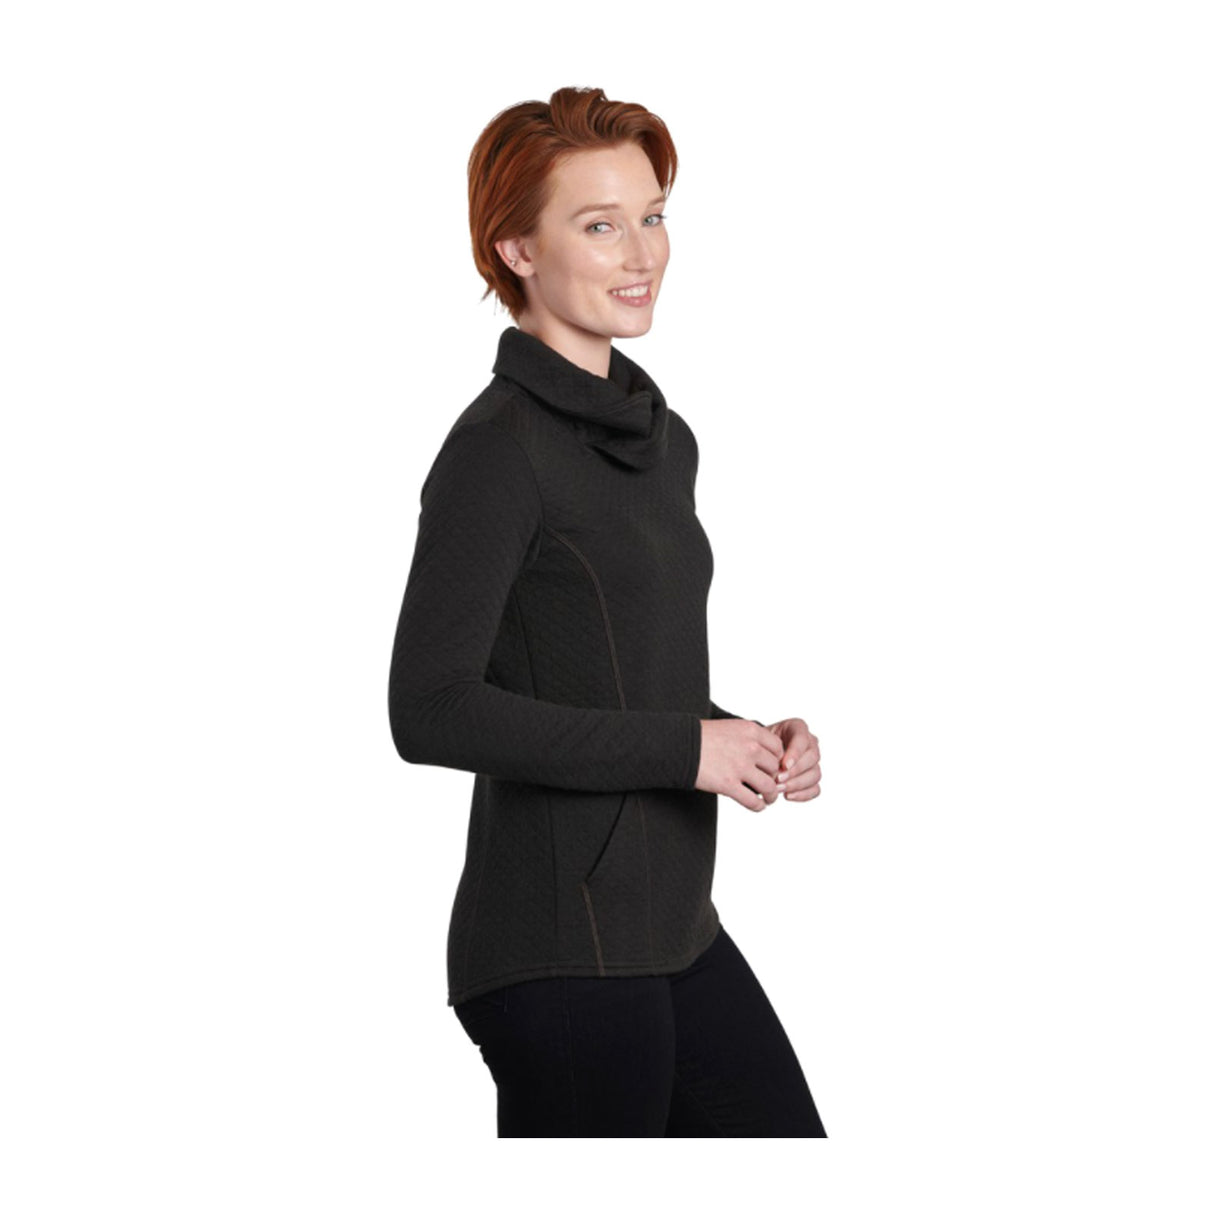 Kuhl Athena Pullover (Women) - Black Apparel - Top - Long Sleeve - The Heel Shoe Fitters